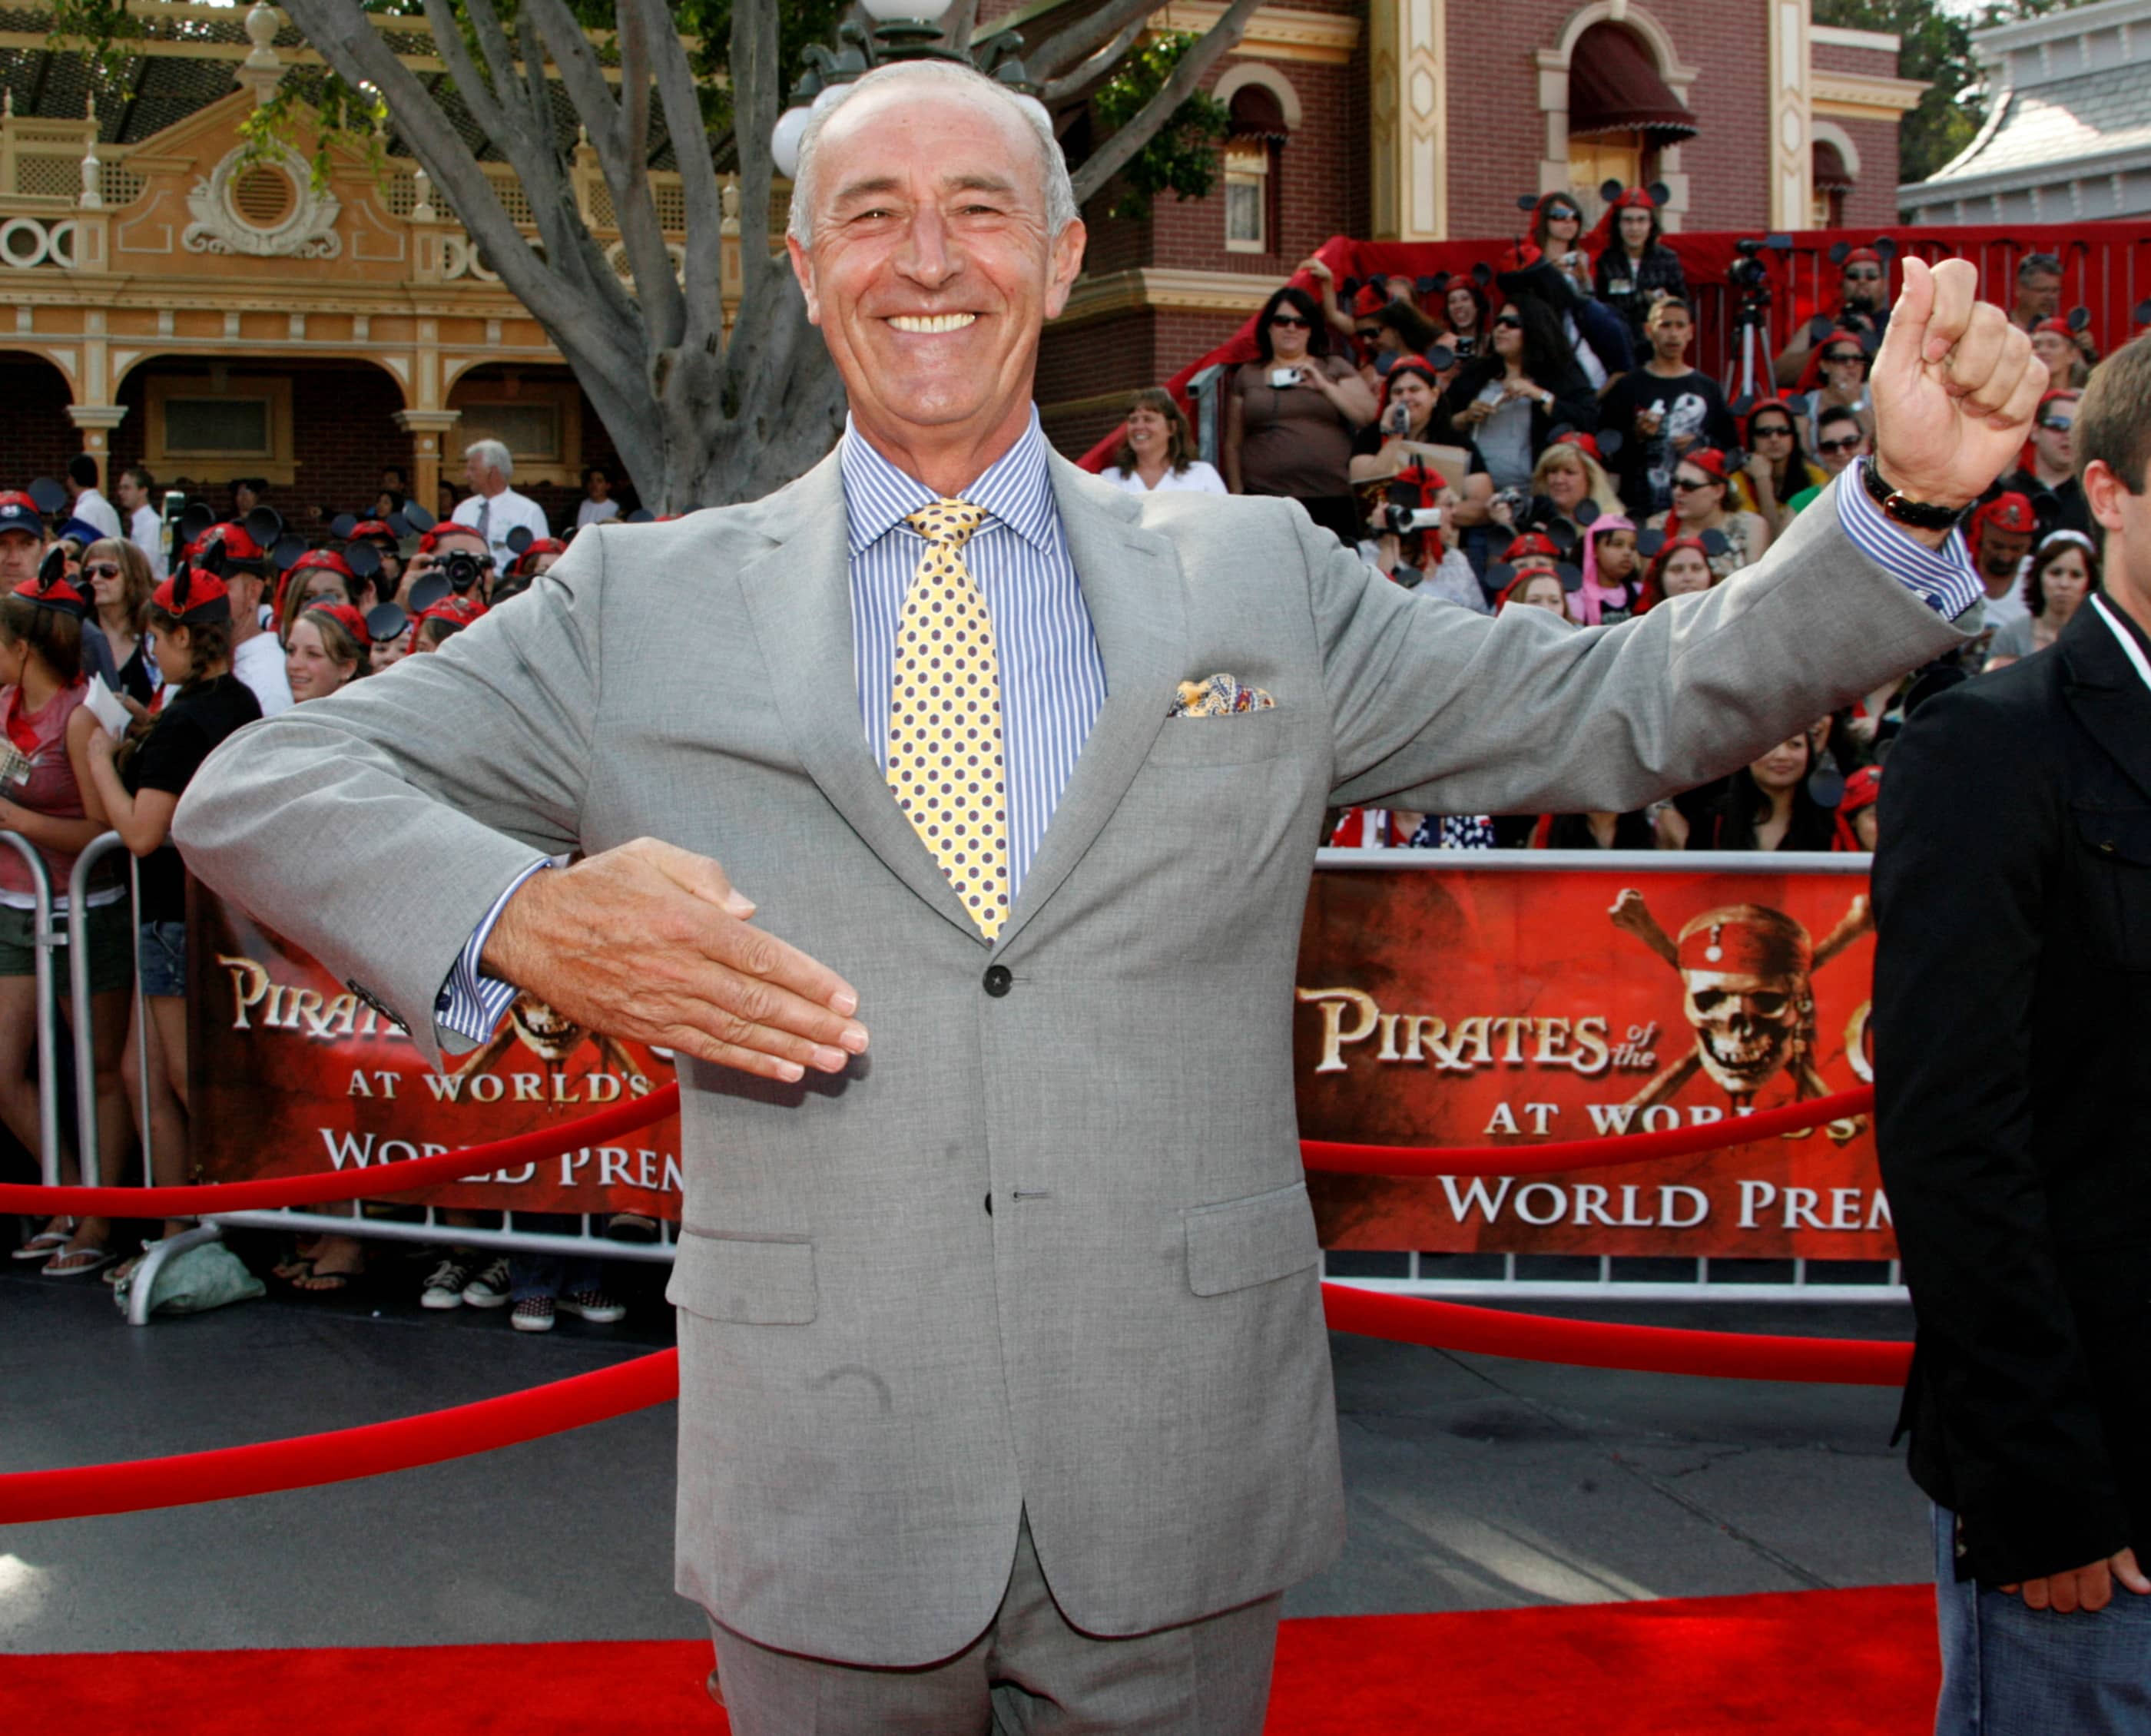 file-photo-dancing-with-the-stars-judge-goodman-poses-at-the-premiere-of-pirates-of-the-caribbean-at-worlds-end-at-disneyland-in-anaheim